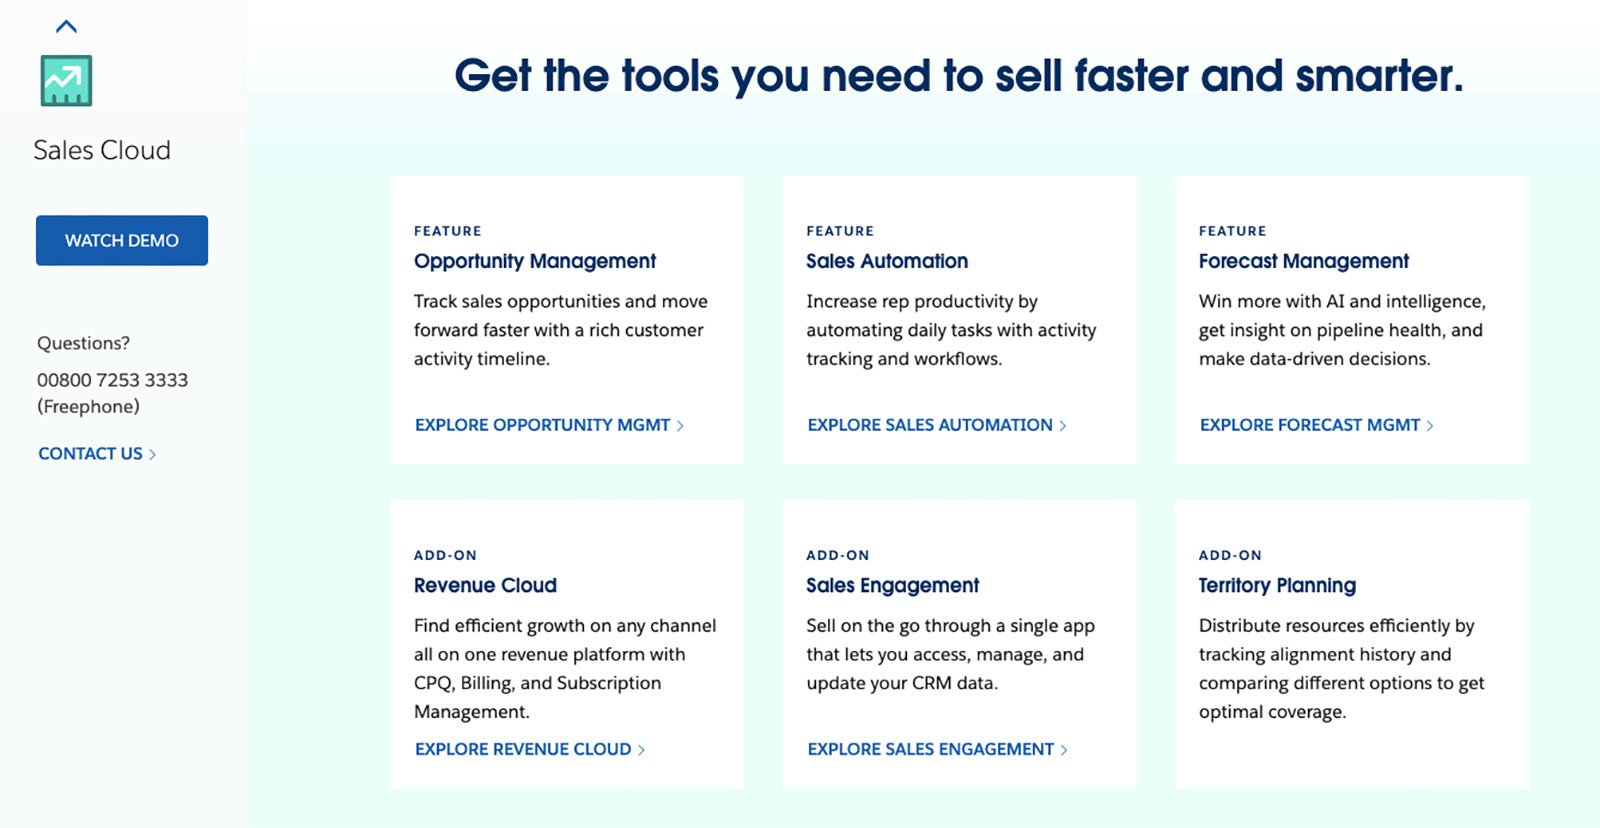 Get-the-tools-you-need-to-sell-faster-and-smarter